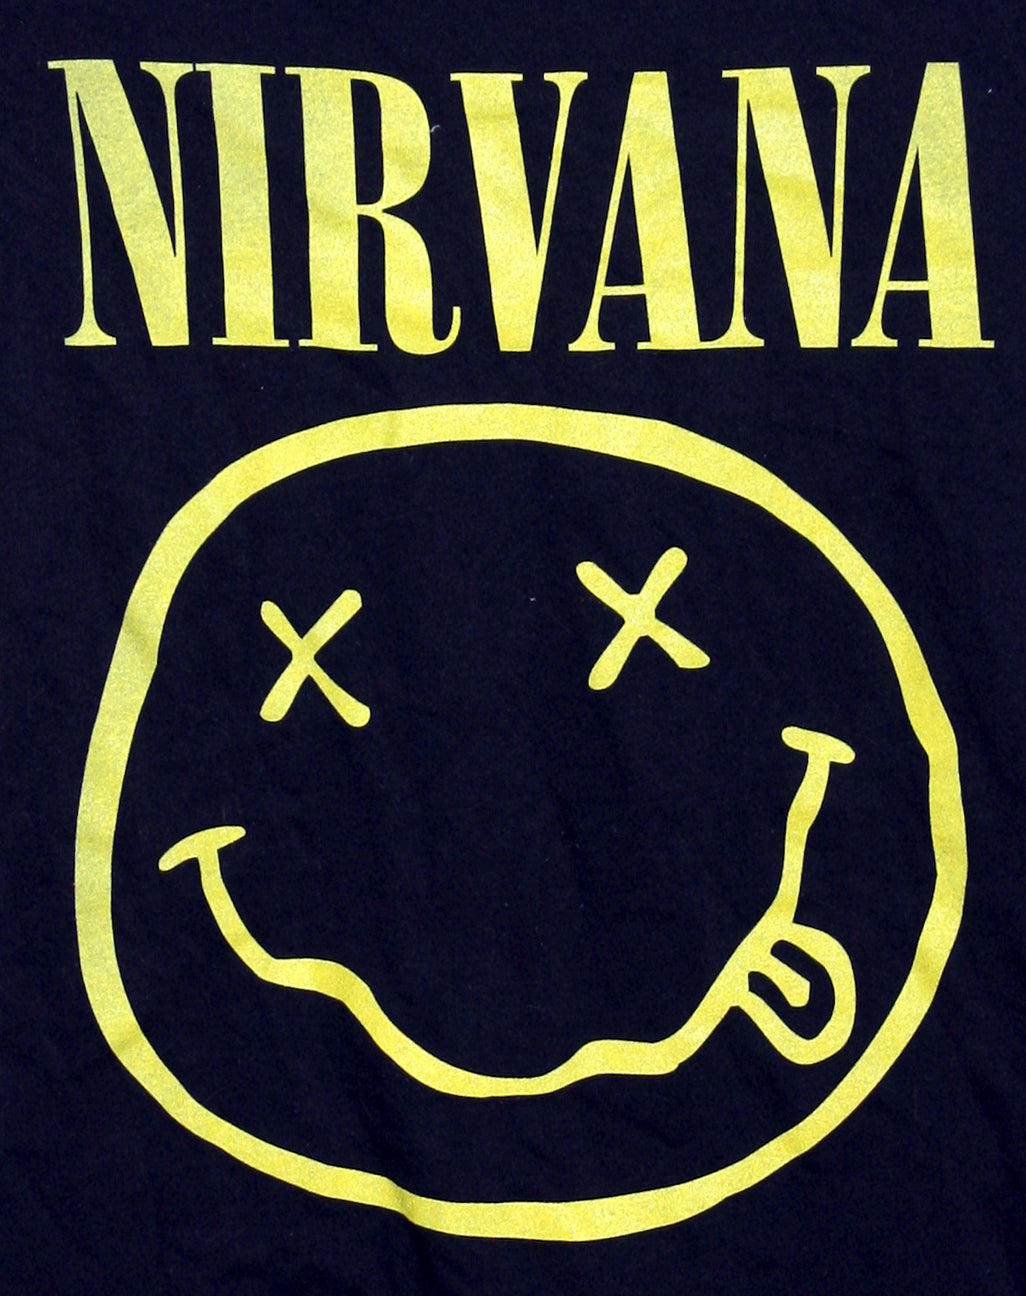 NIRVANA - HAPPY FACE    ,,,,,M, L,         XL (out of stock)